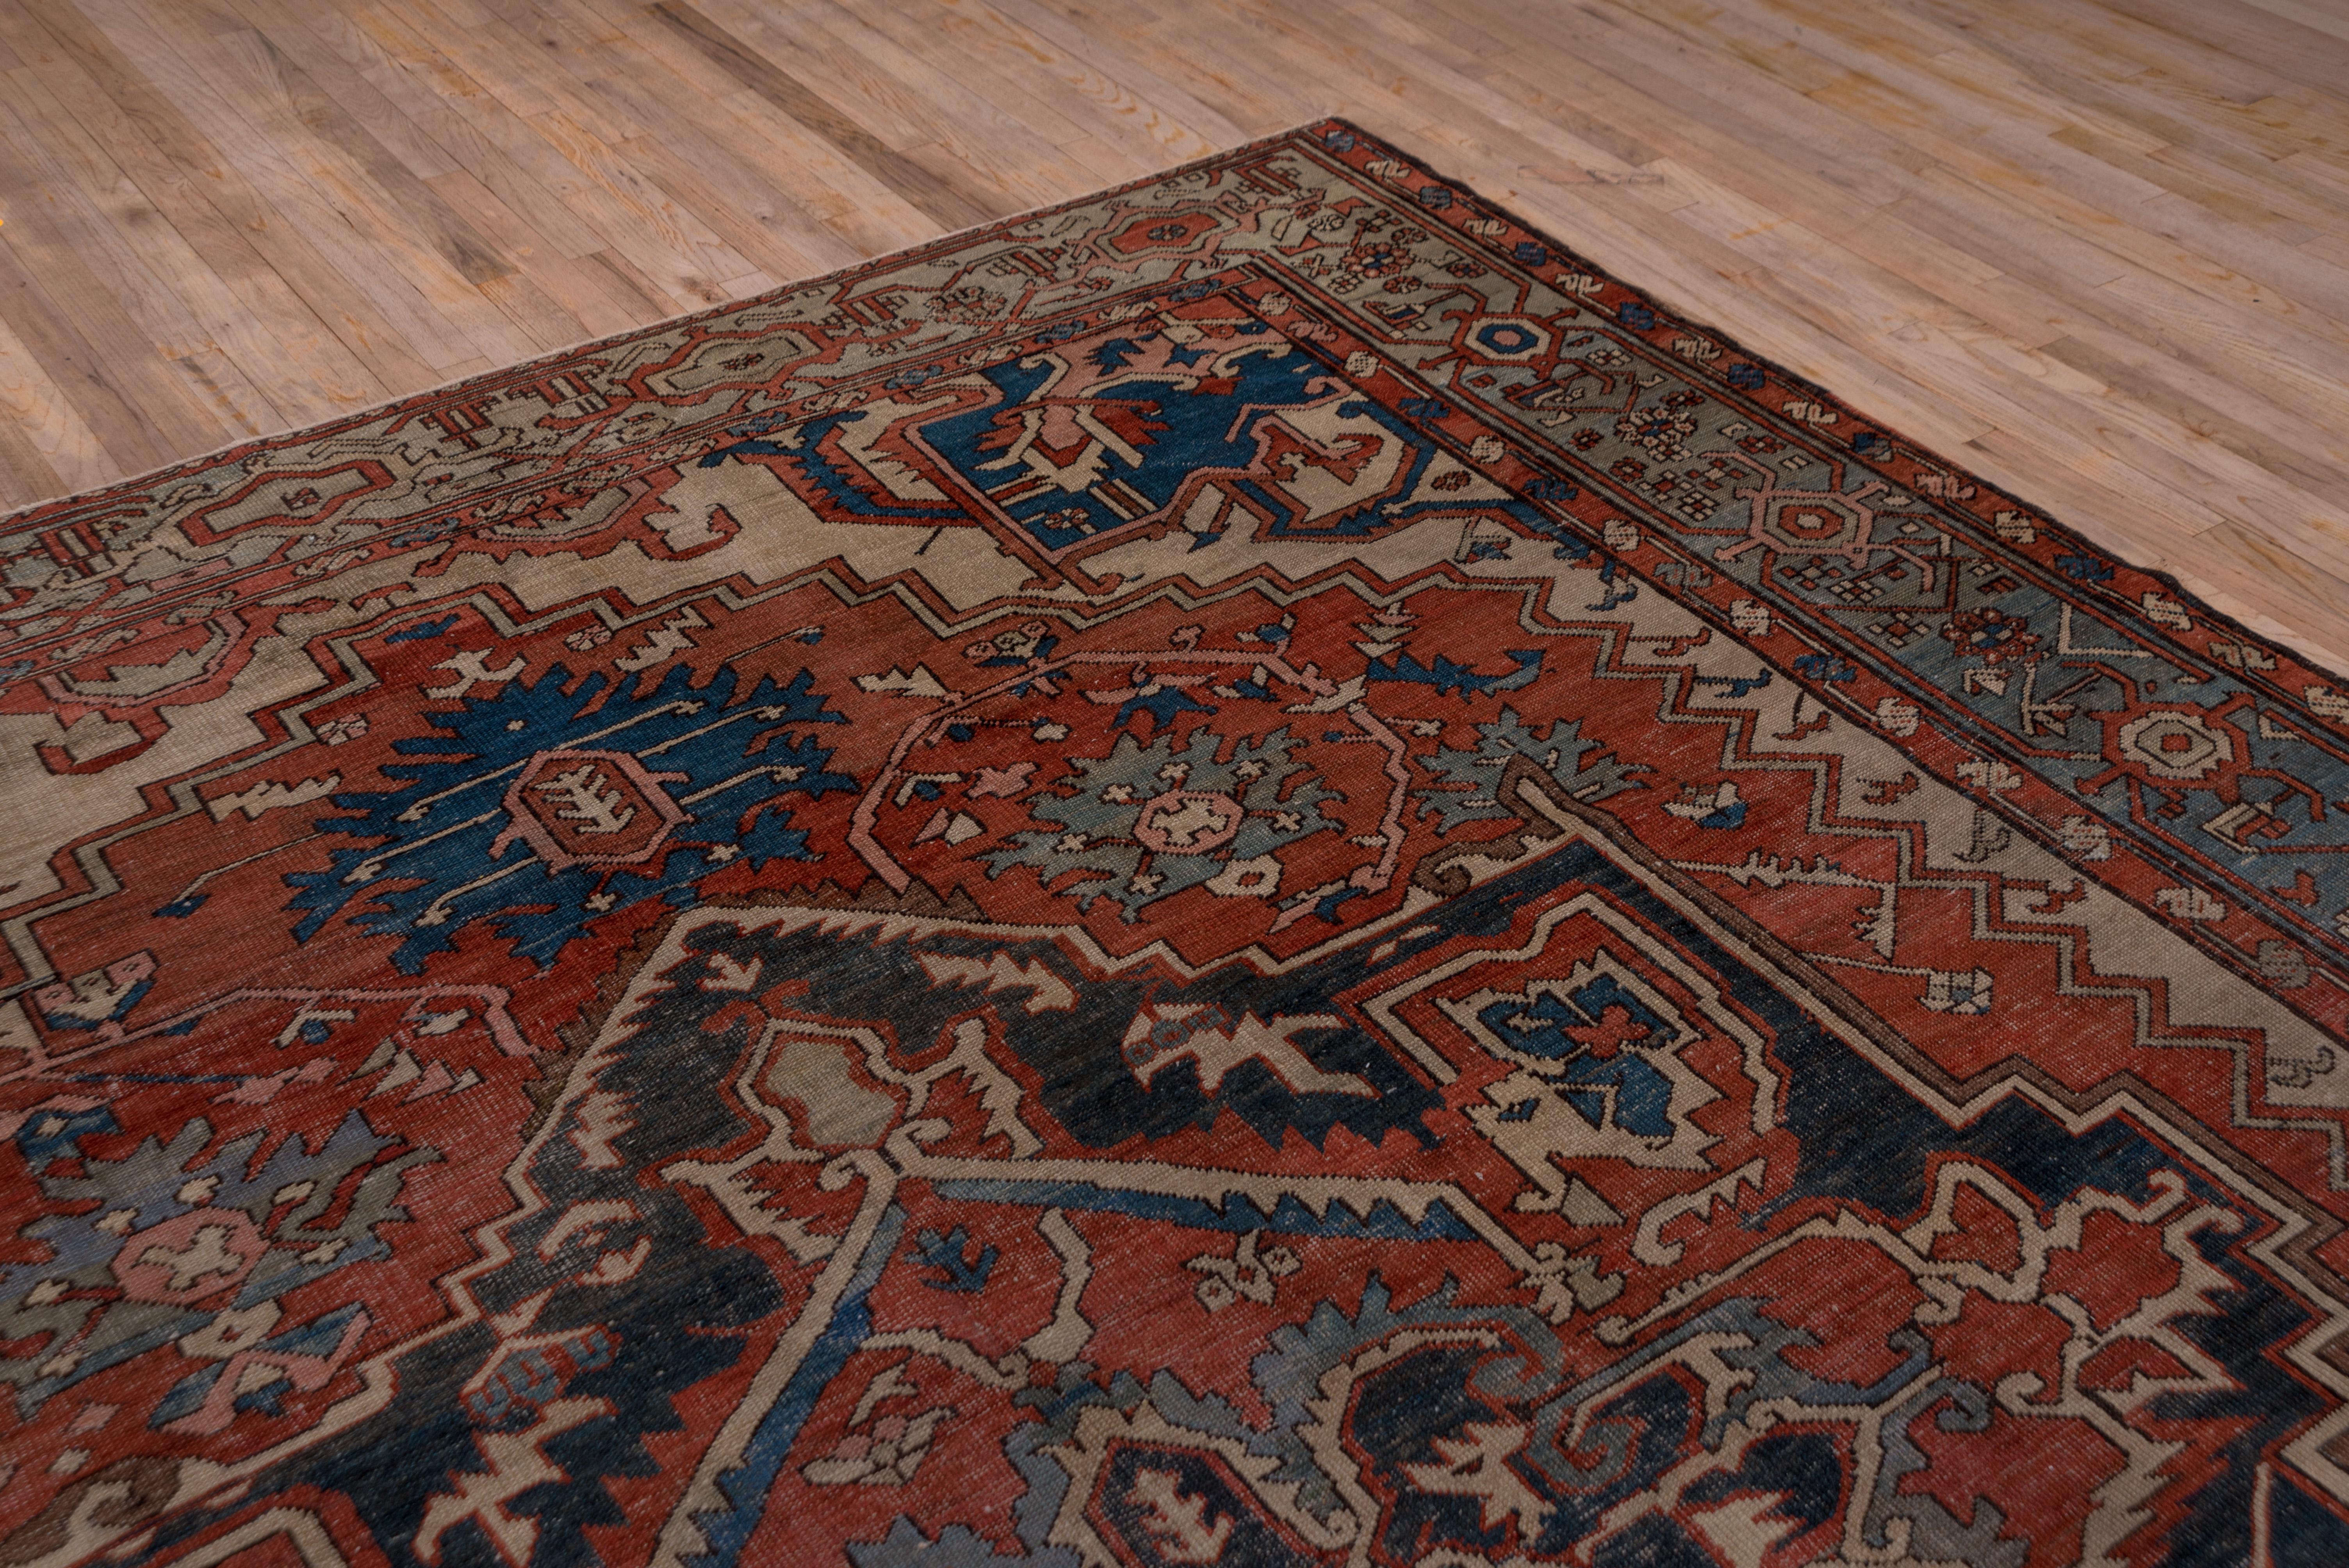 Perfectly naturally dyed and well woven in the Serapi grade, this NW Persian rustic carpet shows an ecru field irregularly, but charmingly, covered by a stepped and notched madder sub field centered by an indigo palmette octogramme. Light corner